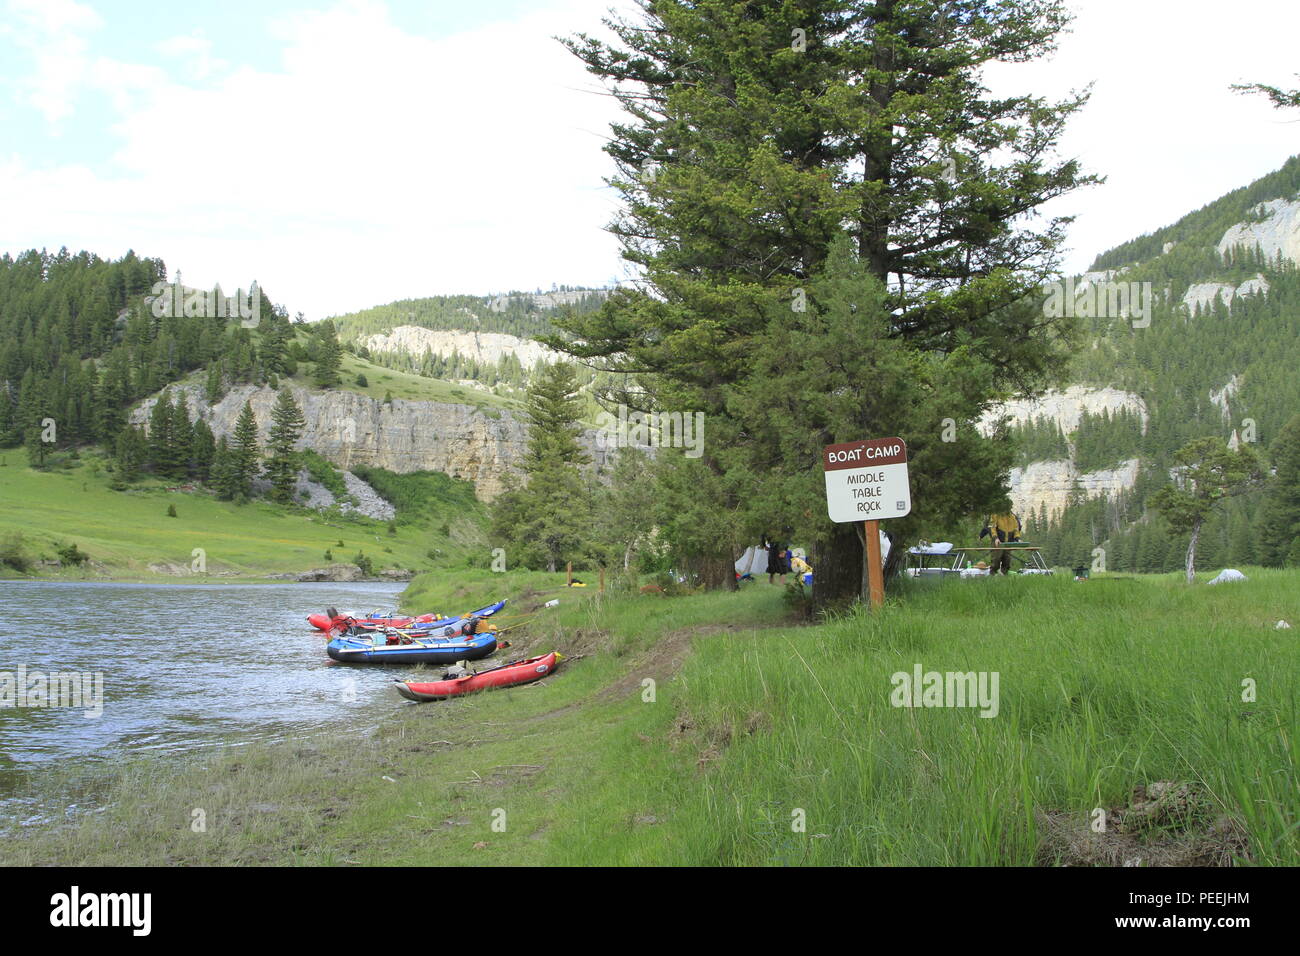 Table Rock Boat Camp, Smith River State Park, Montana, USA Stock Photo